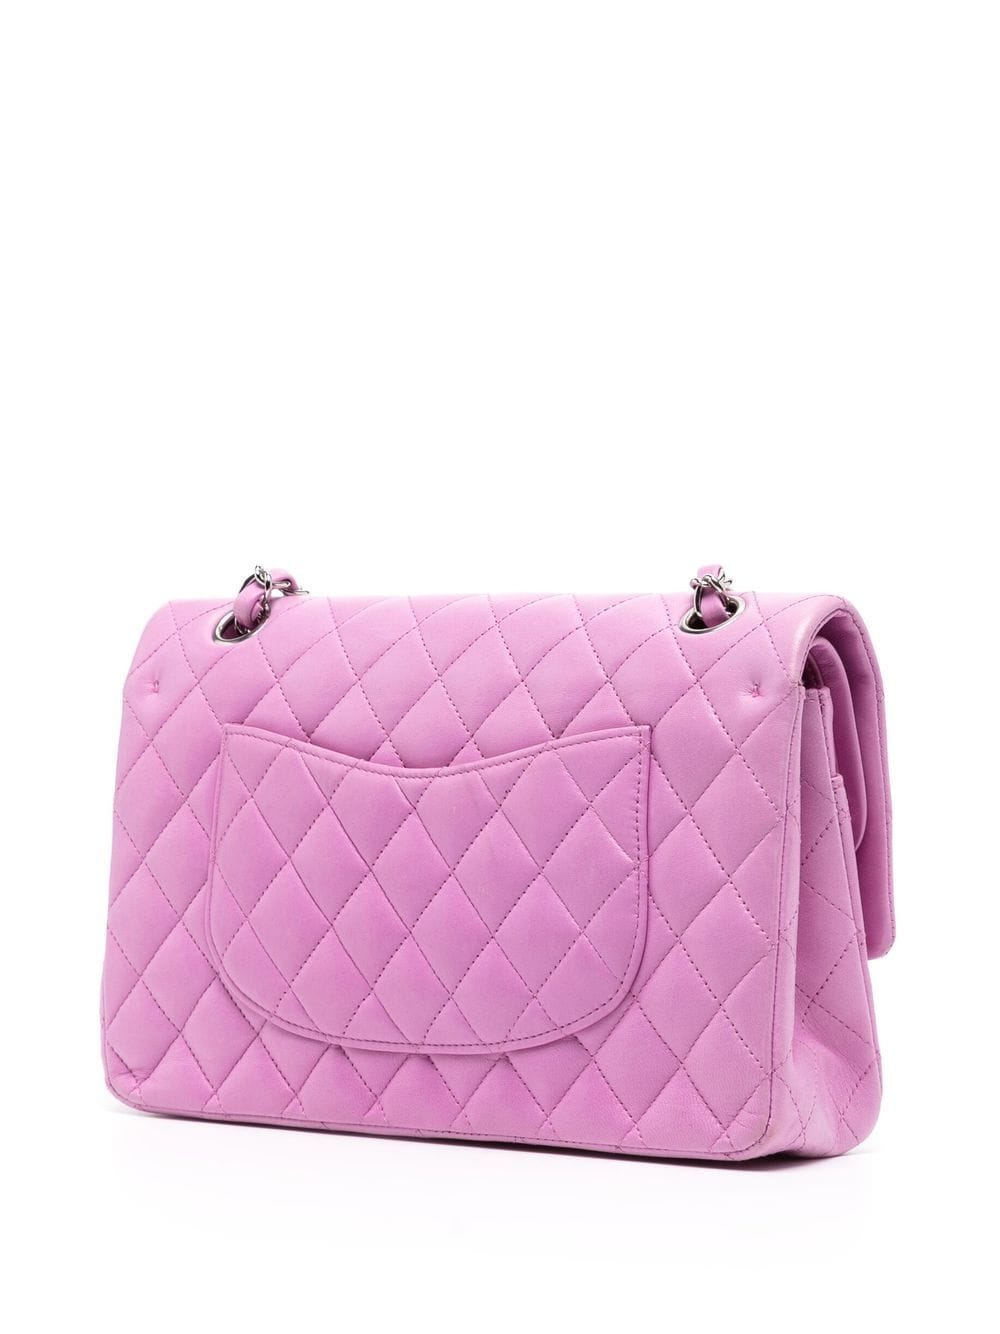 Chanel Classic Medium Double Flap Bag In Pink Quilted Jersey And